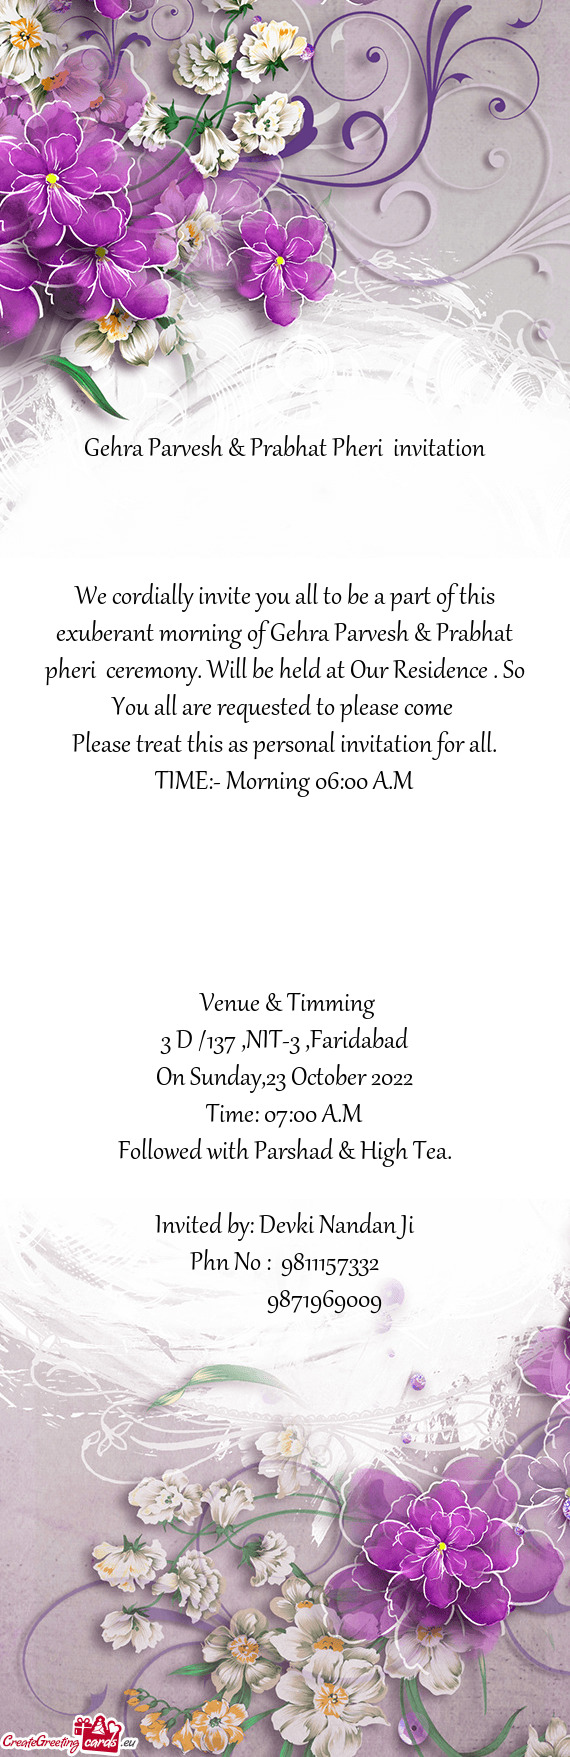 We cordially invite you all to be a part of this exuberant morning of Gehra Parvesh & Prabhat pheri